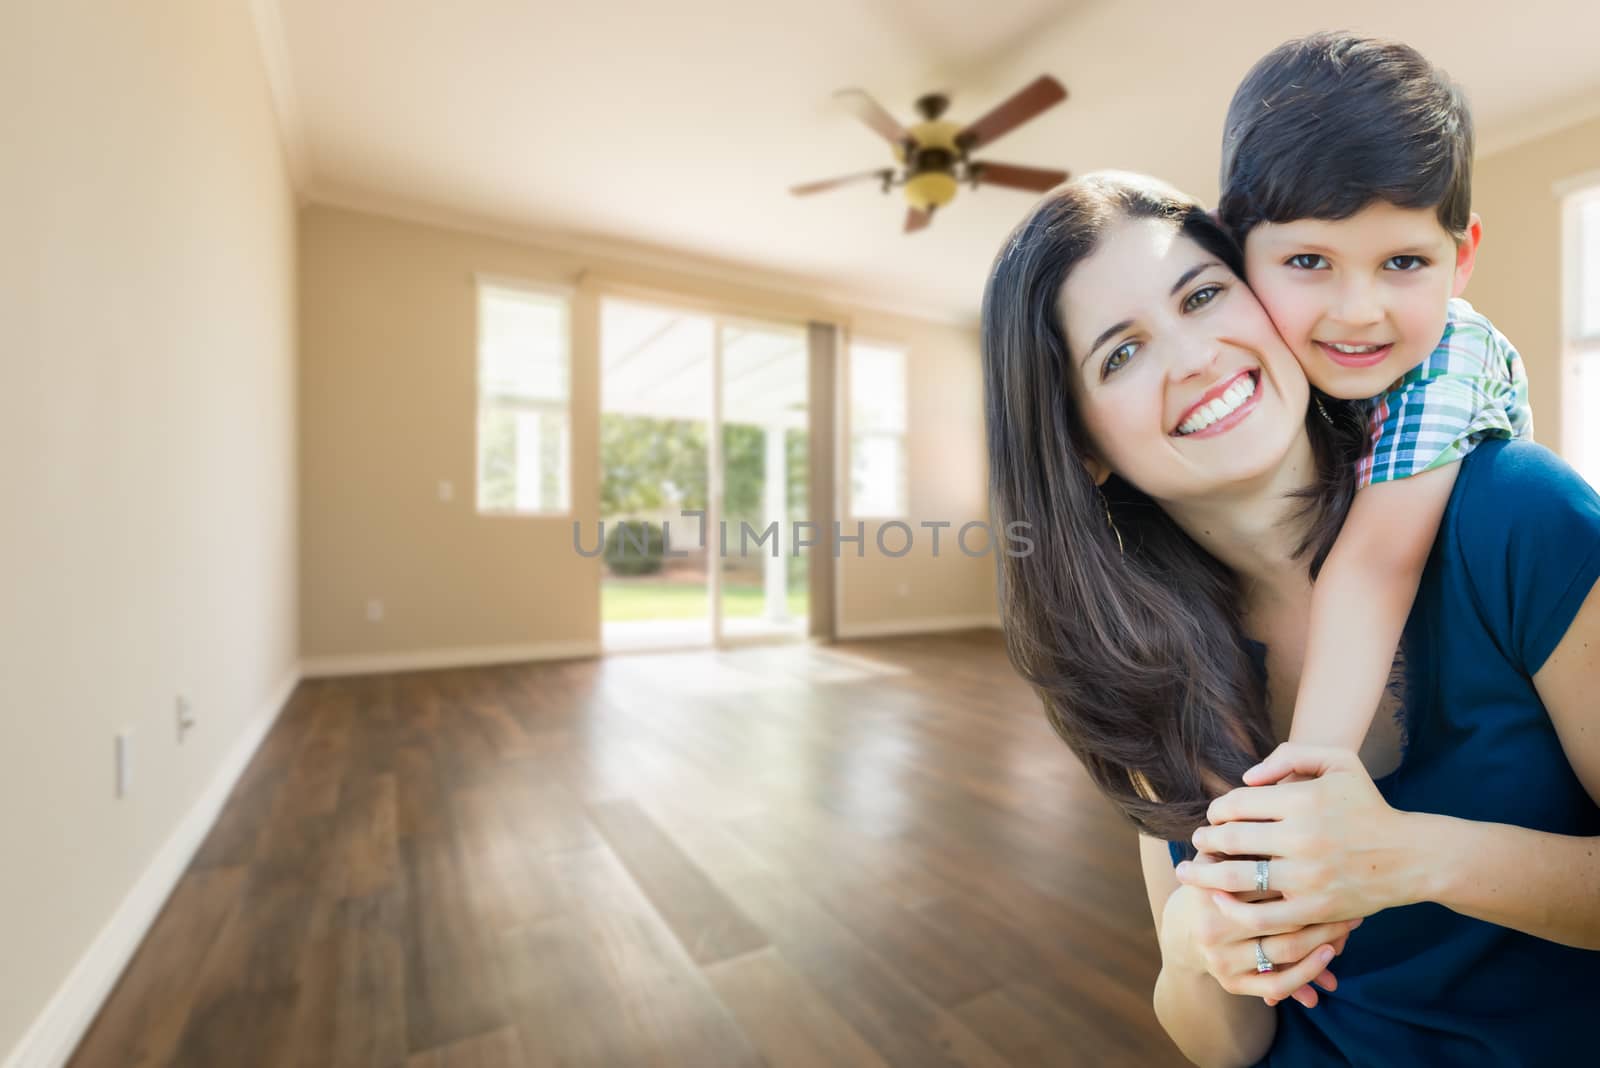 Young Mother and Son Inside Empty Room with Wood Floors. by Feverpitched